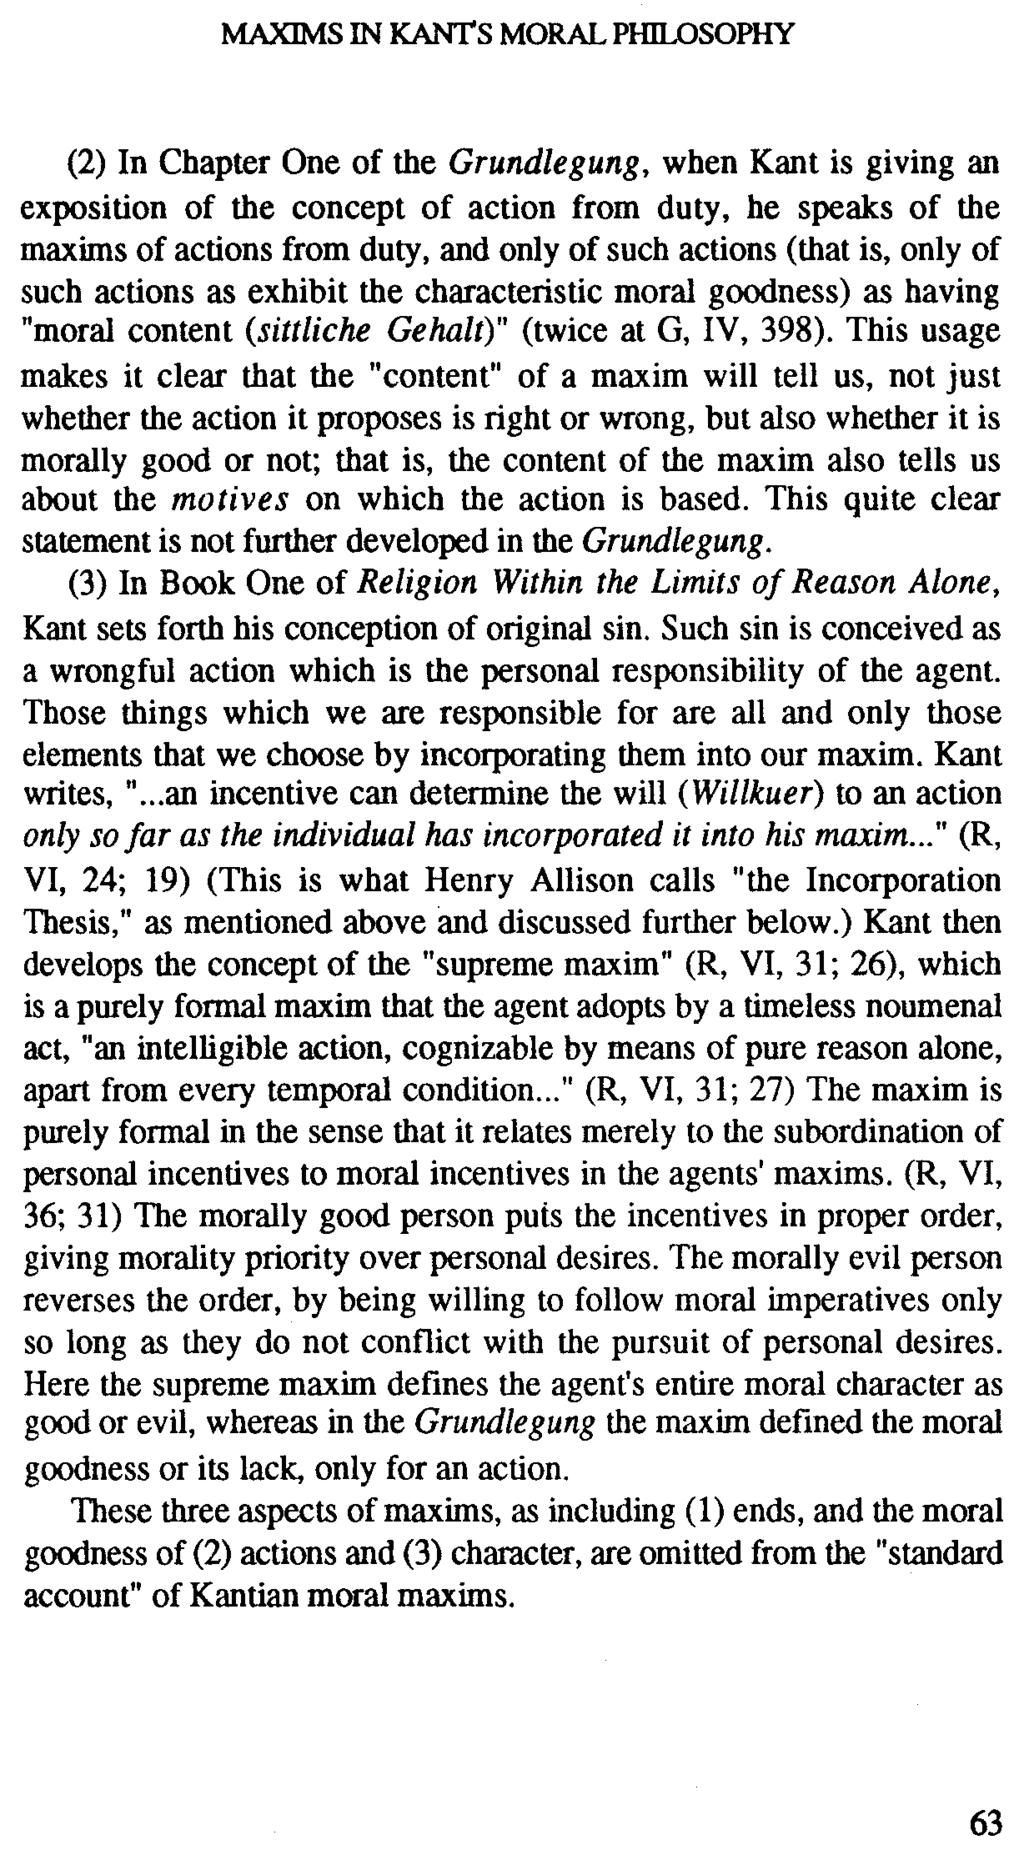 MAXIM:S IN }(ANTS MORAL PHILOSOPHY (2) In Chapter One of the Grundlegung, when Kant is giving an exposition of the concept of action from duty, he speaks of the maxims of actions from duty, and only